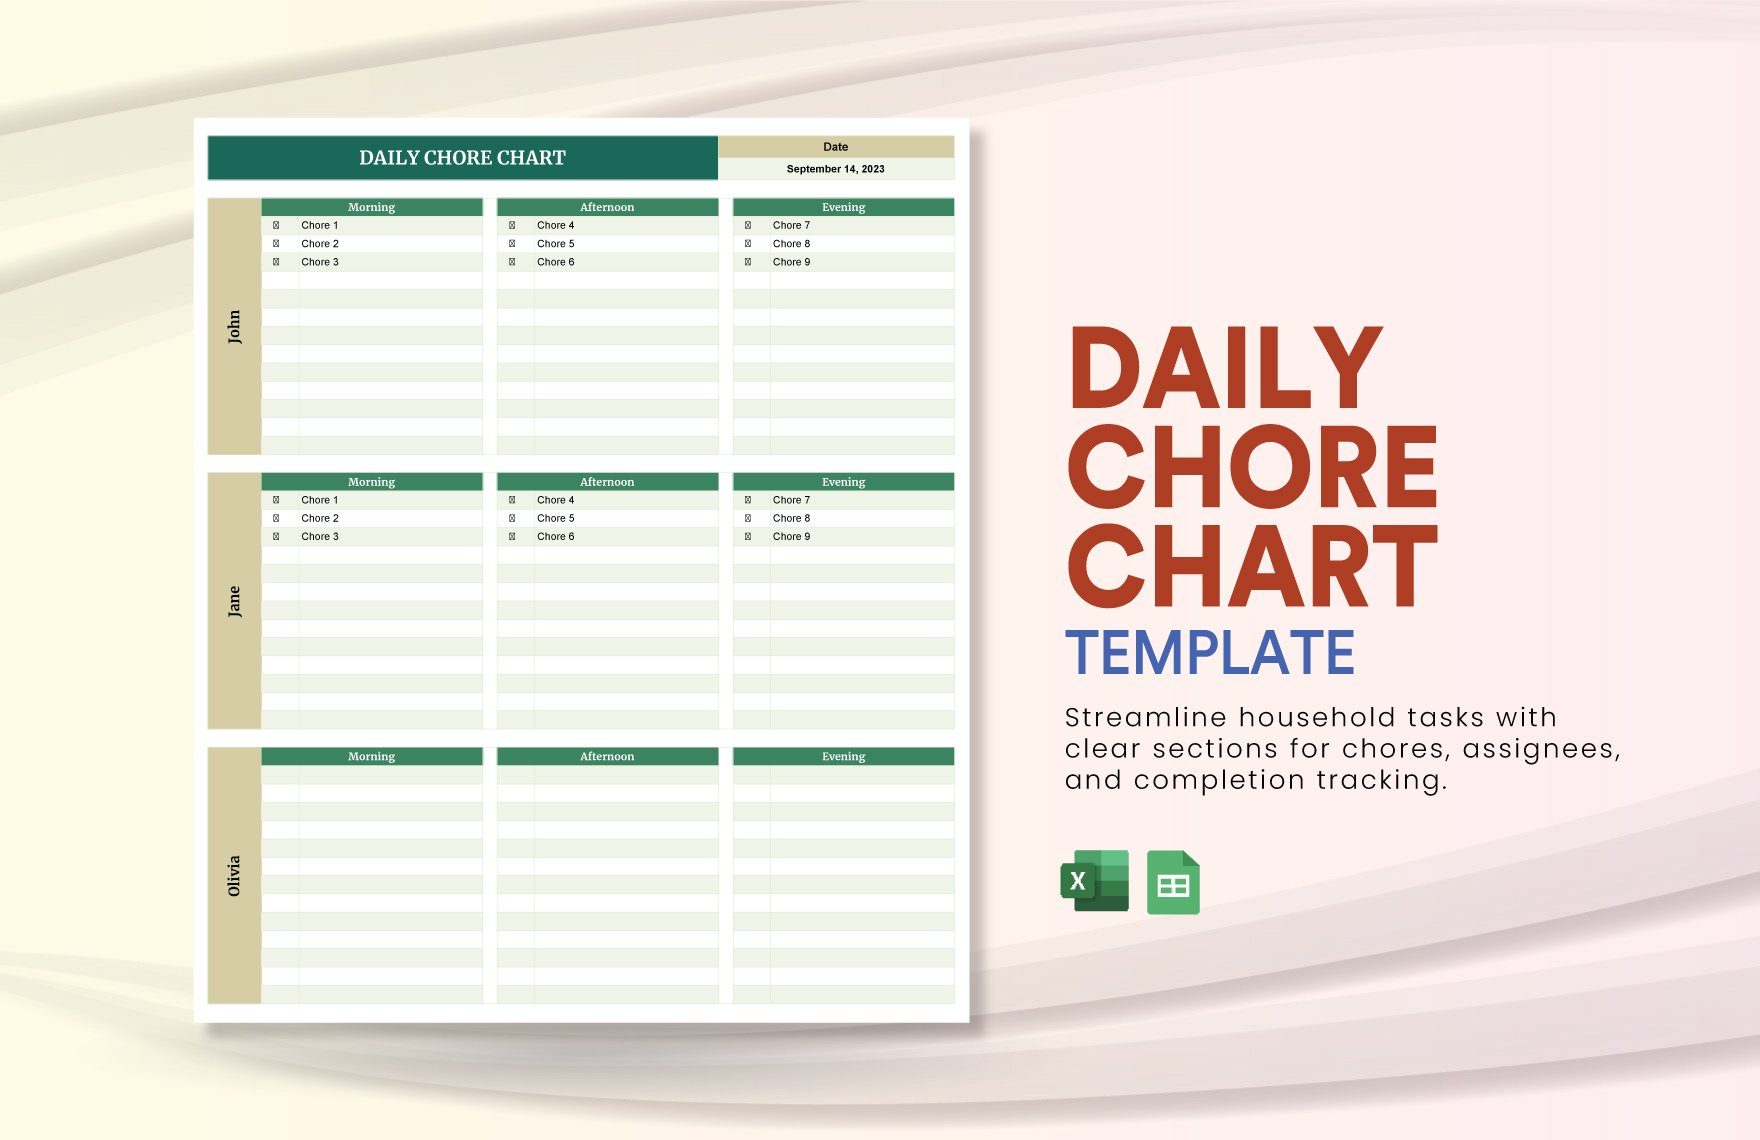 Daily Chore Chart Template in Excel, Google Sheets